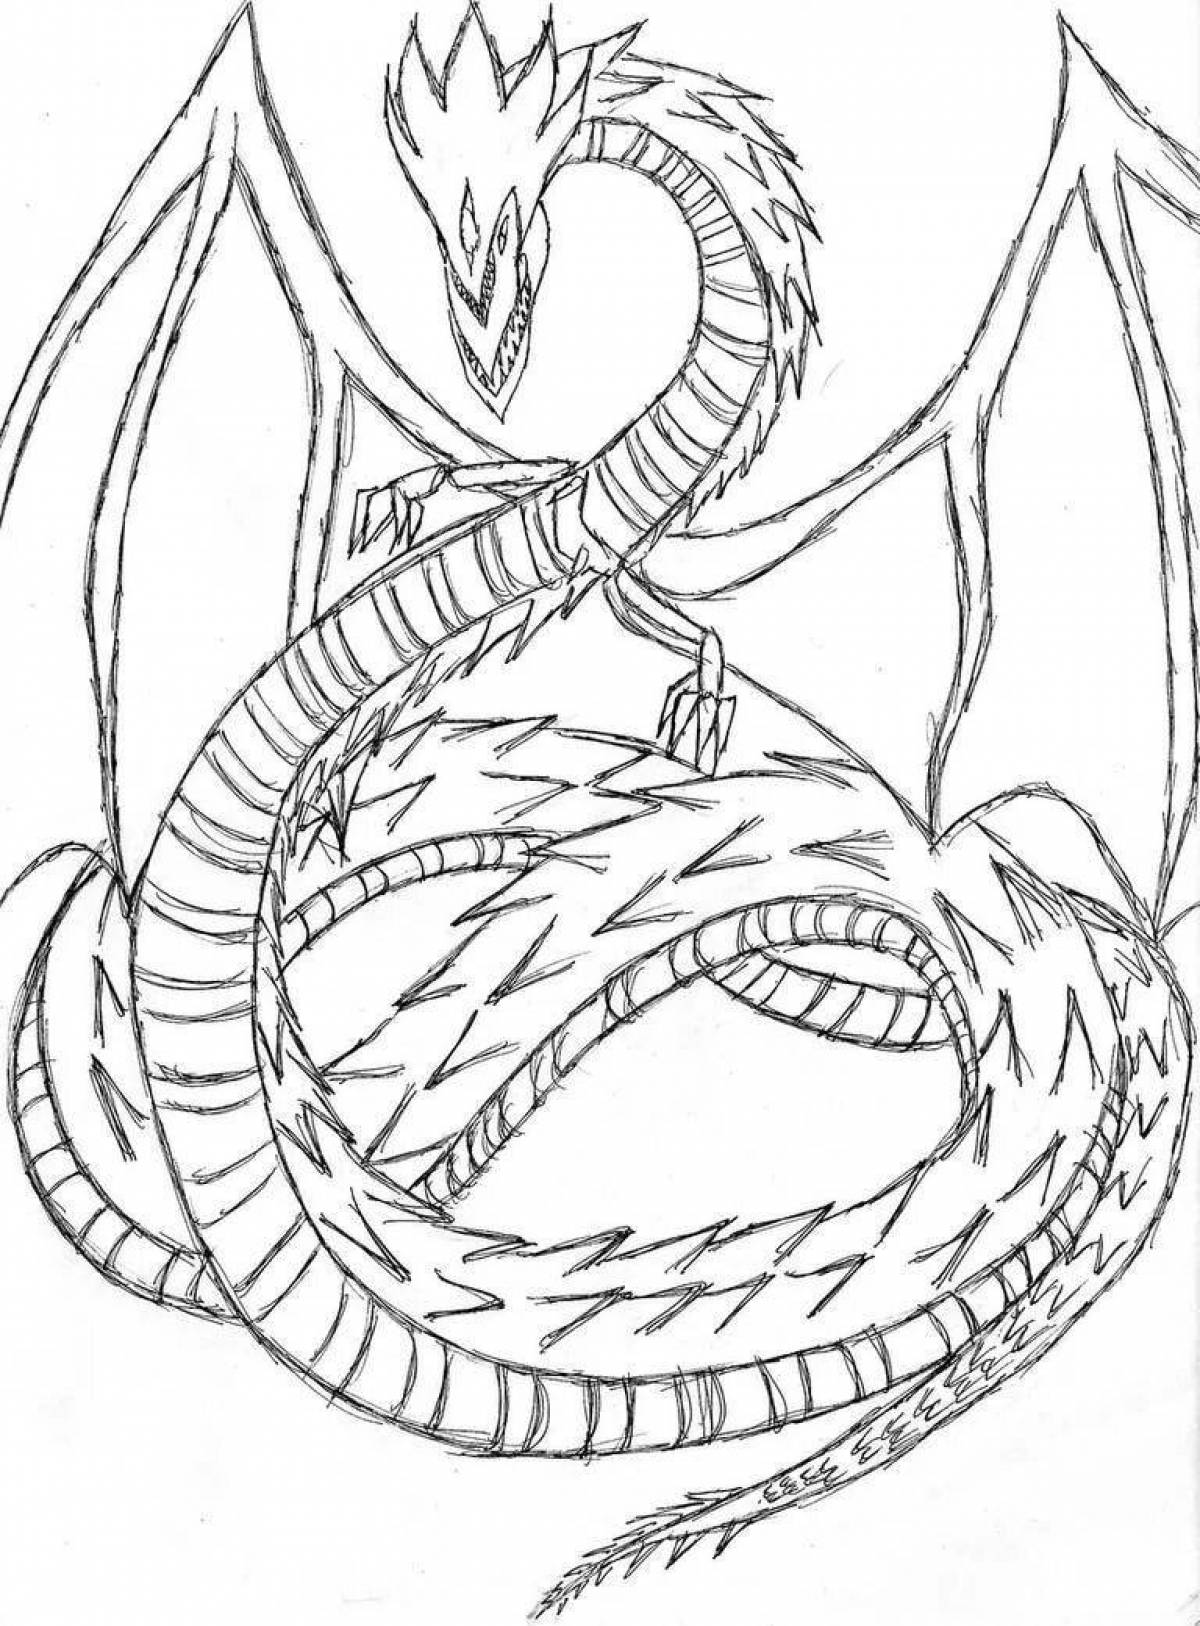 Death dragon glowing whisper coloring page